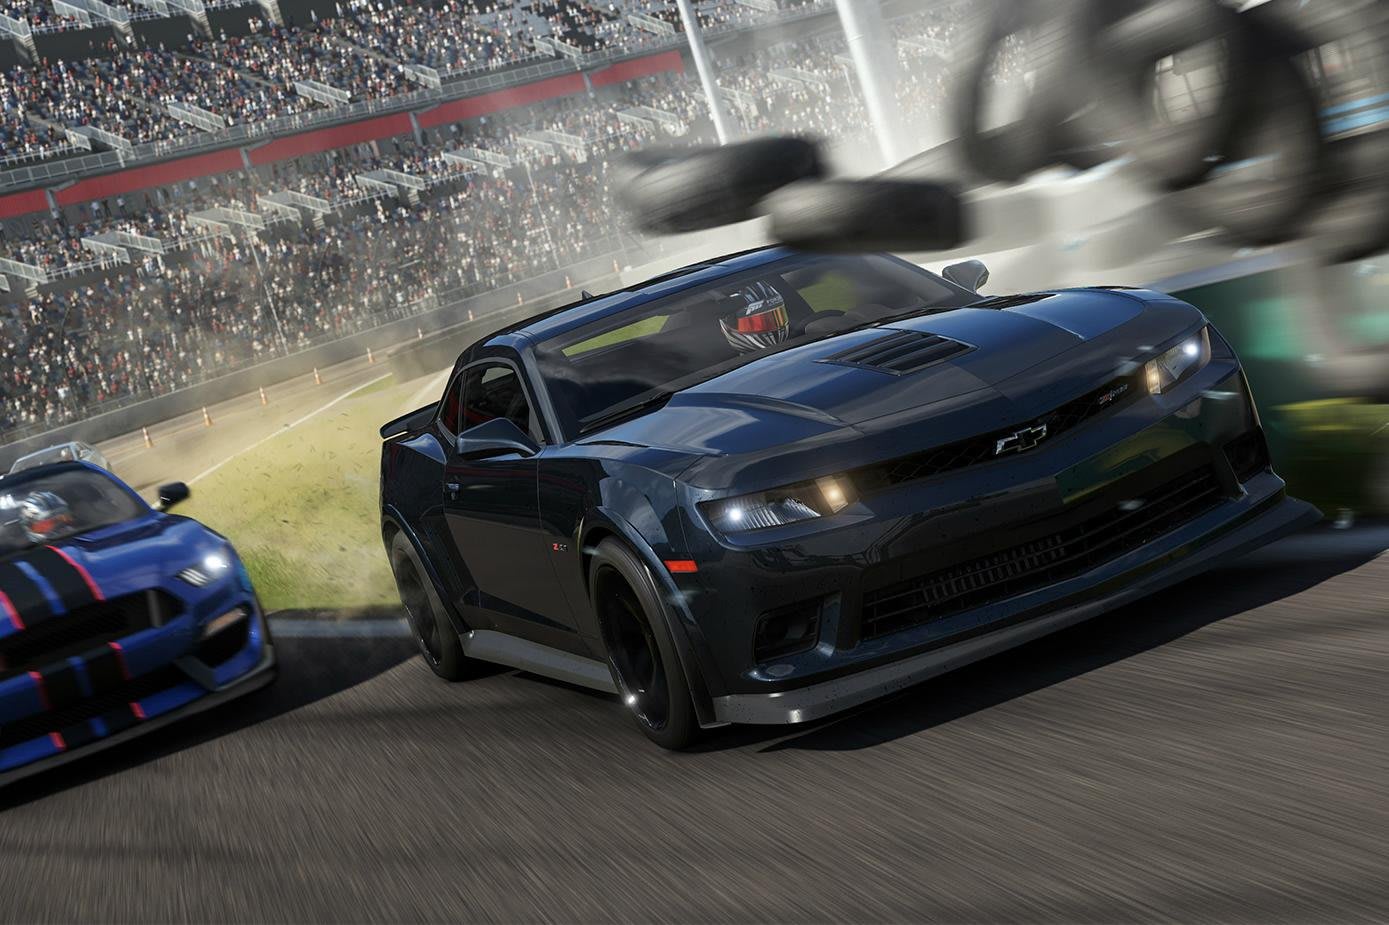 Forza Motorsport Review: Mixed Emotions